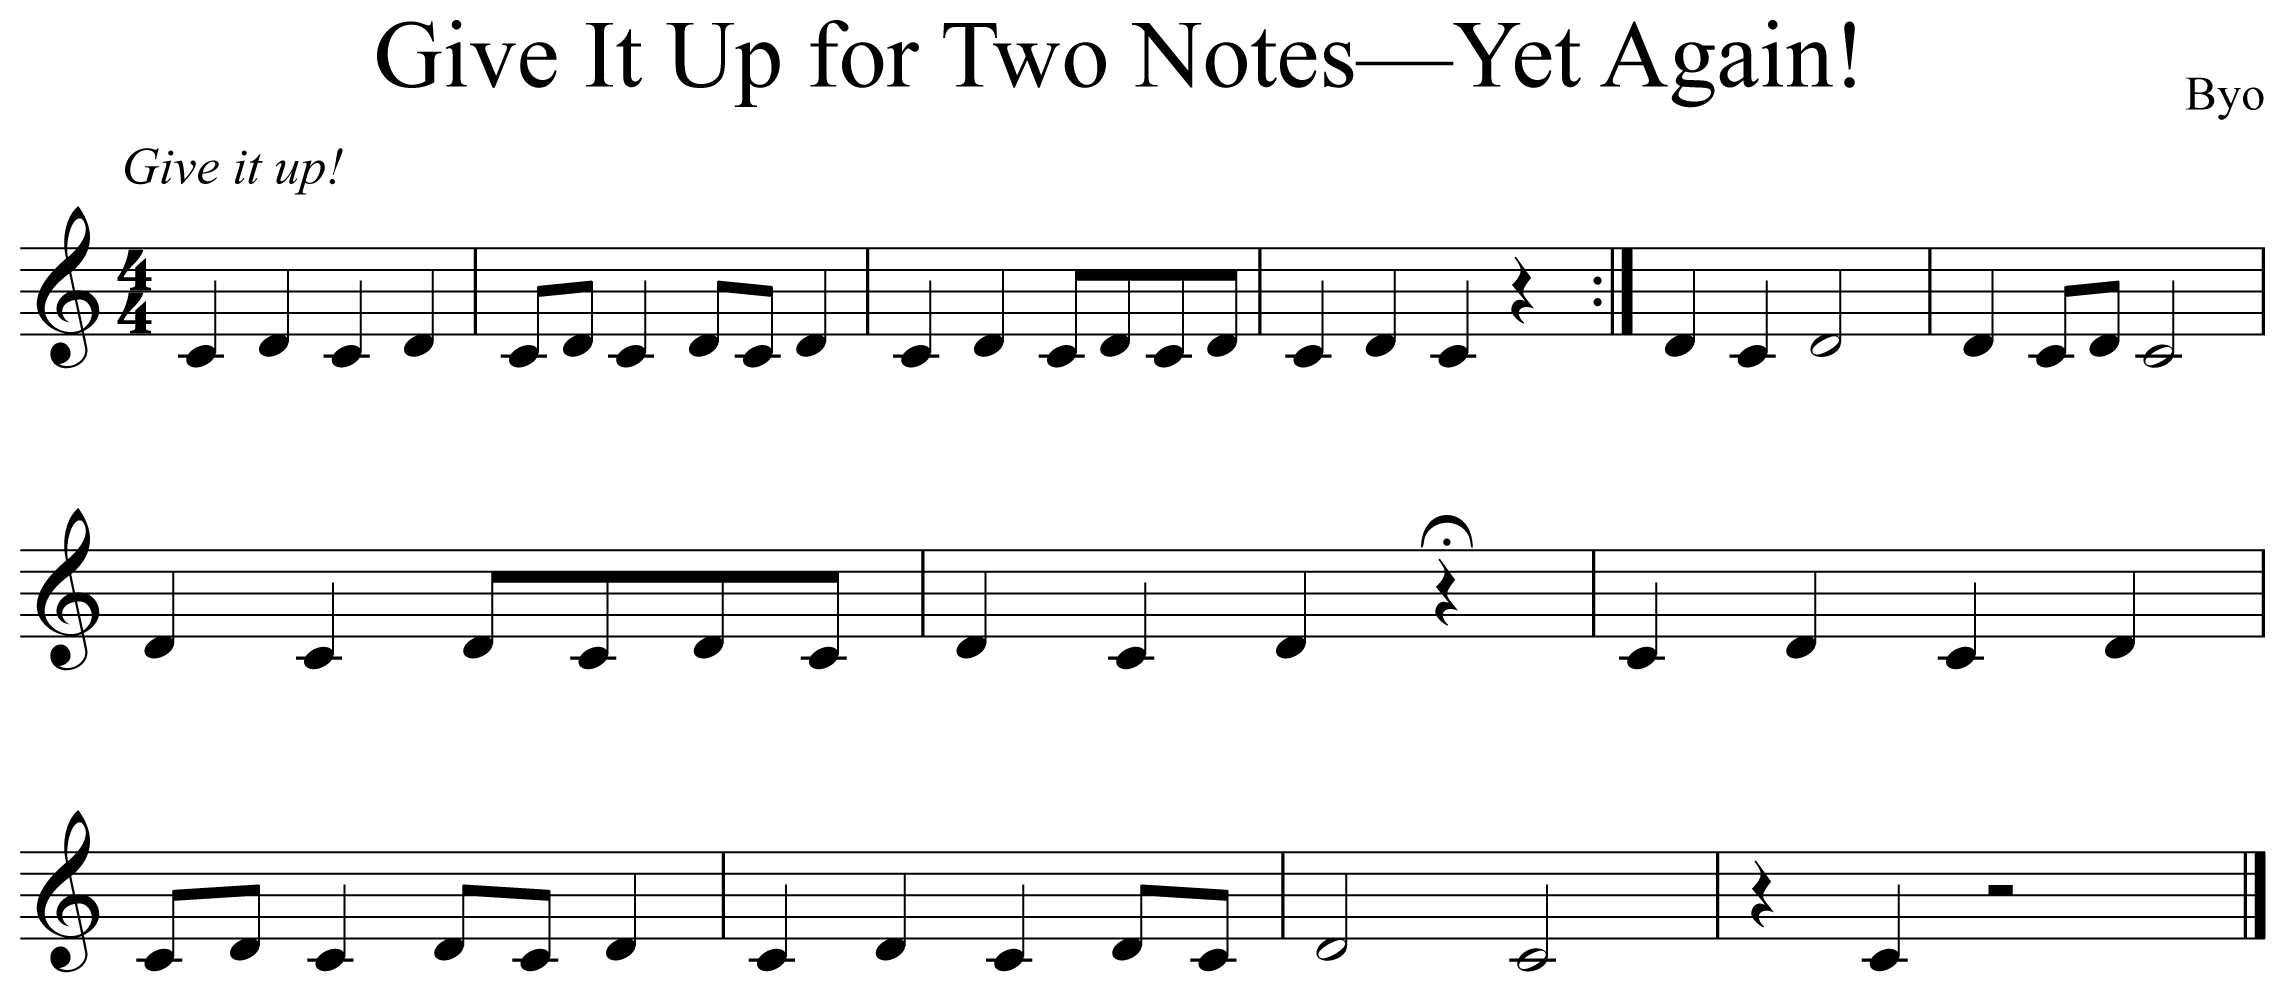 Give it up for Two Notes Yet Again Notation Trumpet